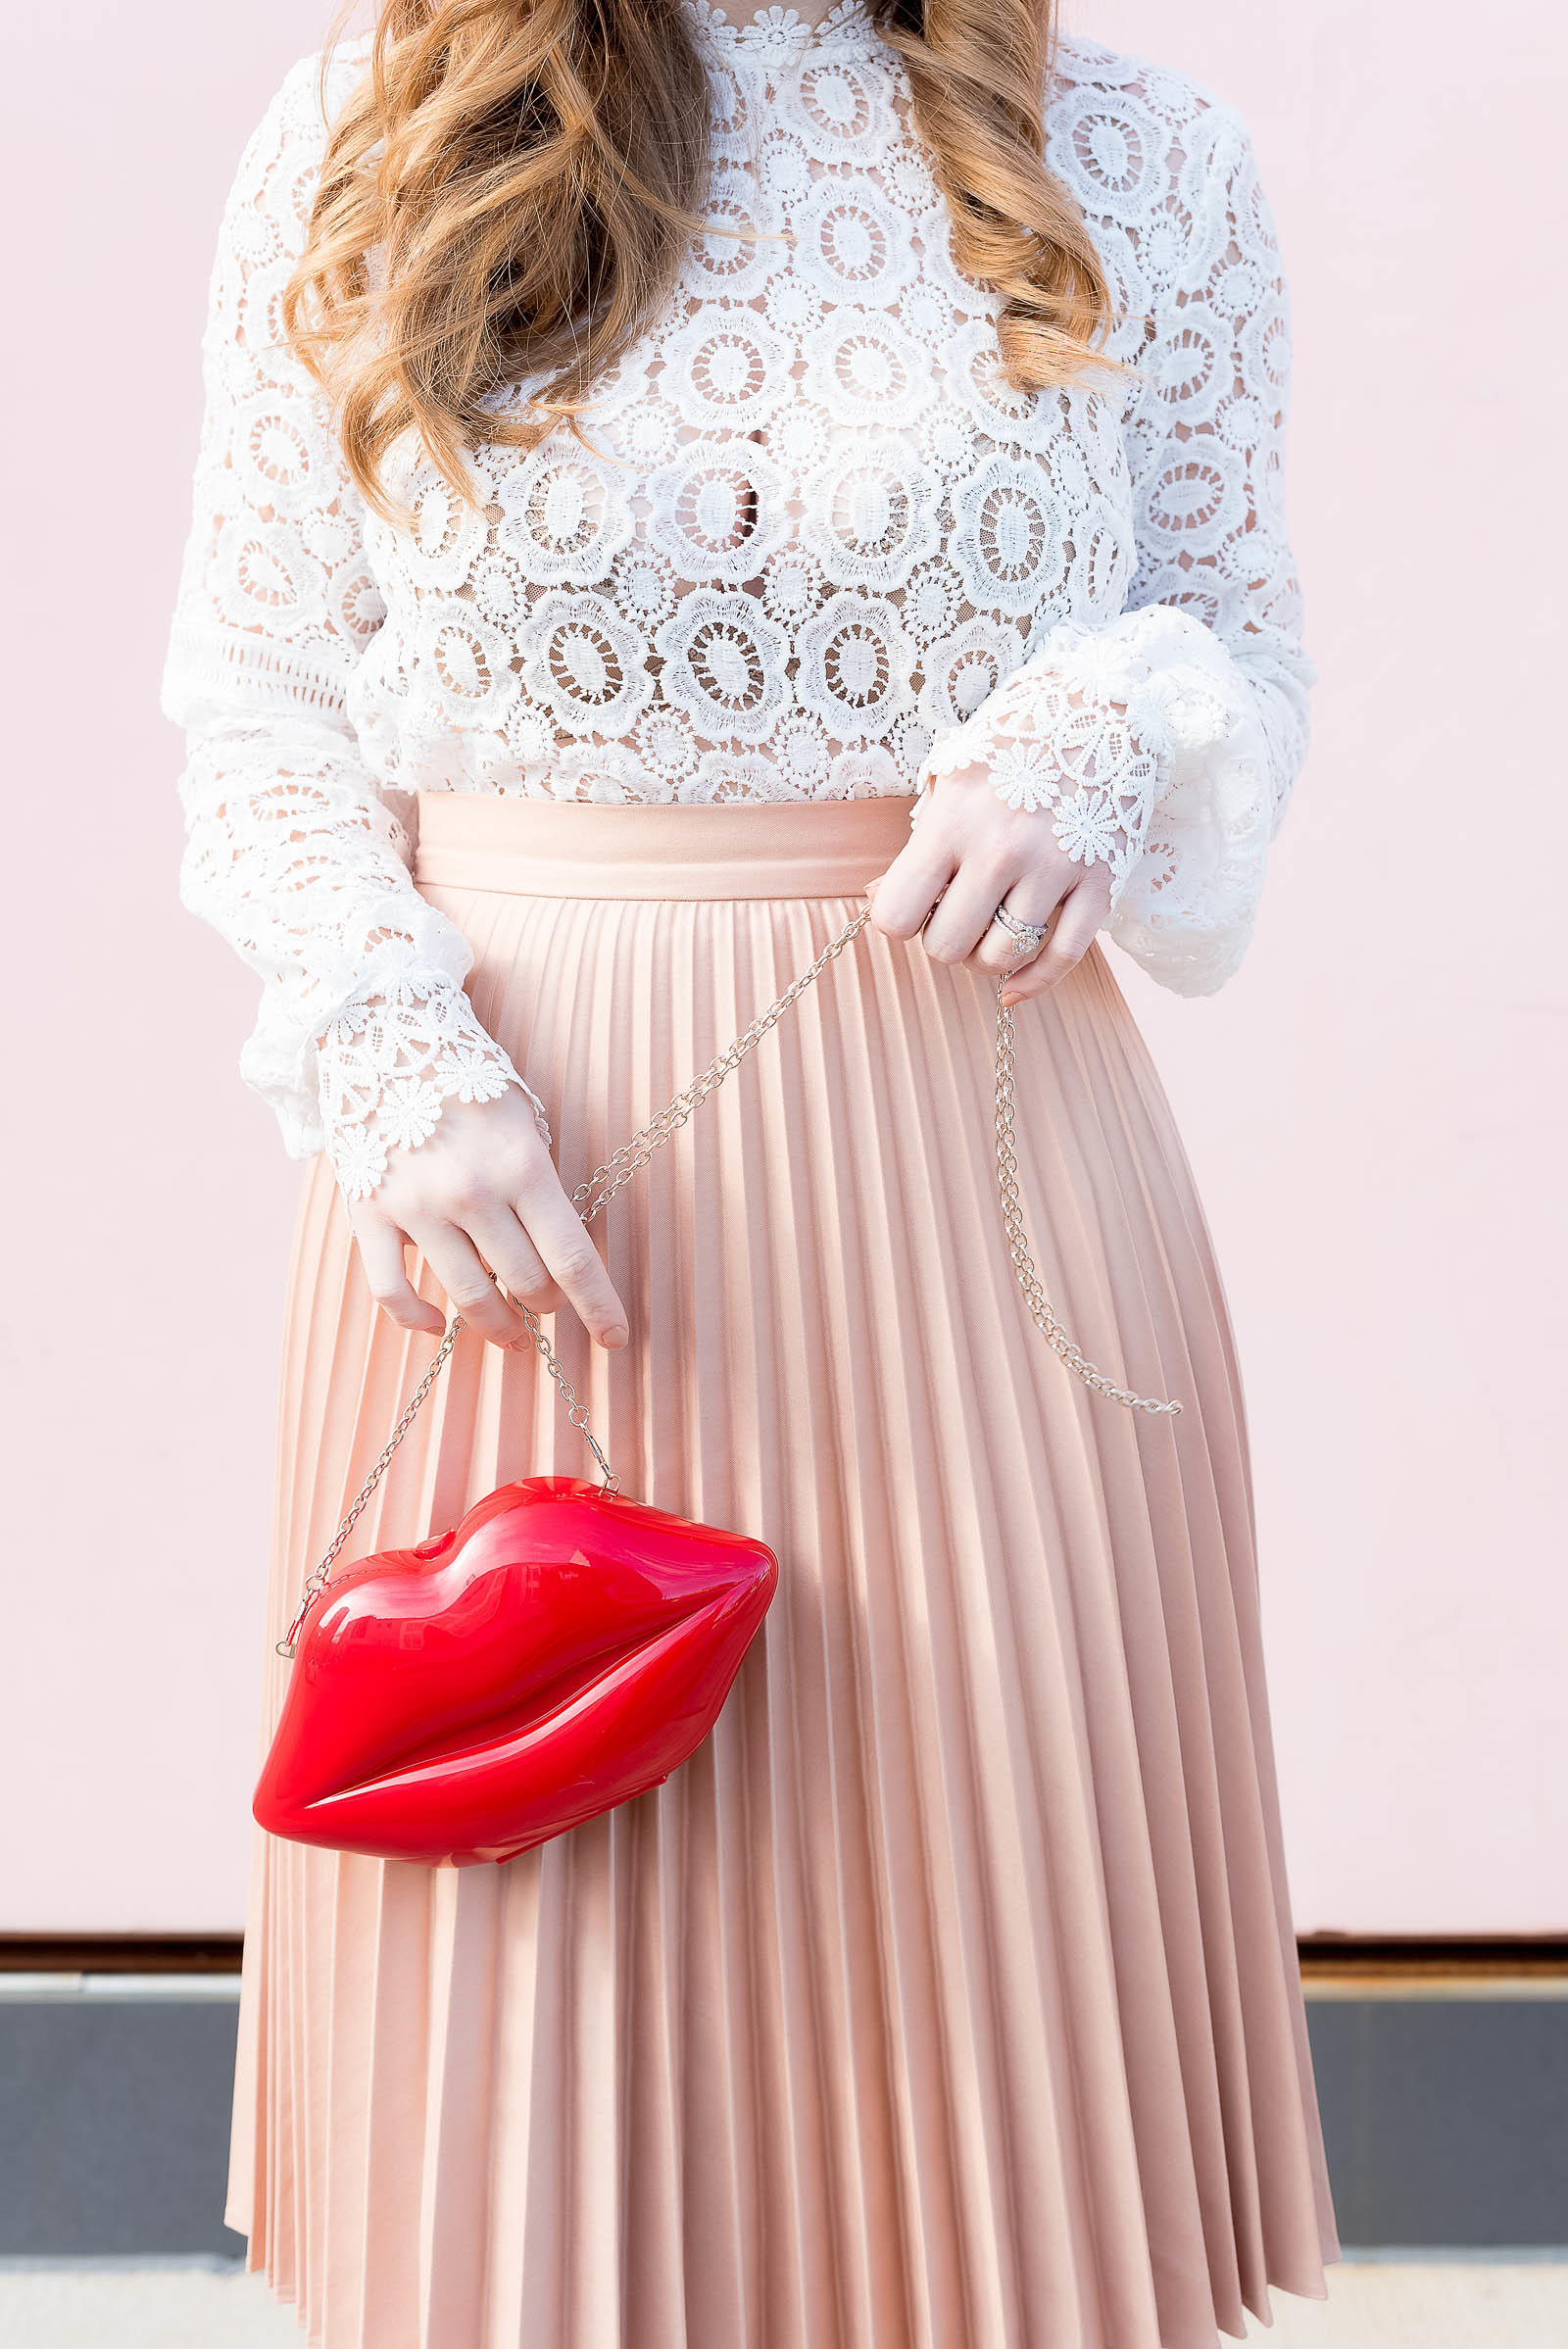 White Lace Pink Pleats Red Pumps Lips Valentine's Day Outfit